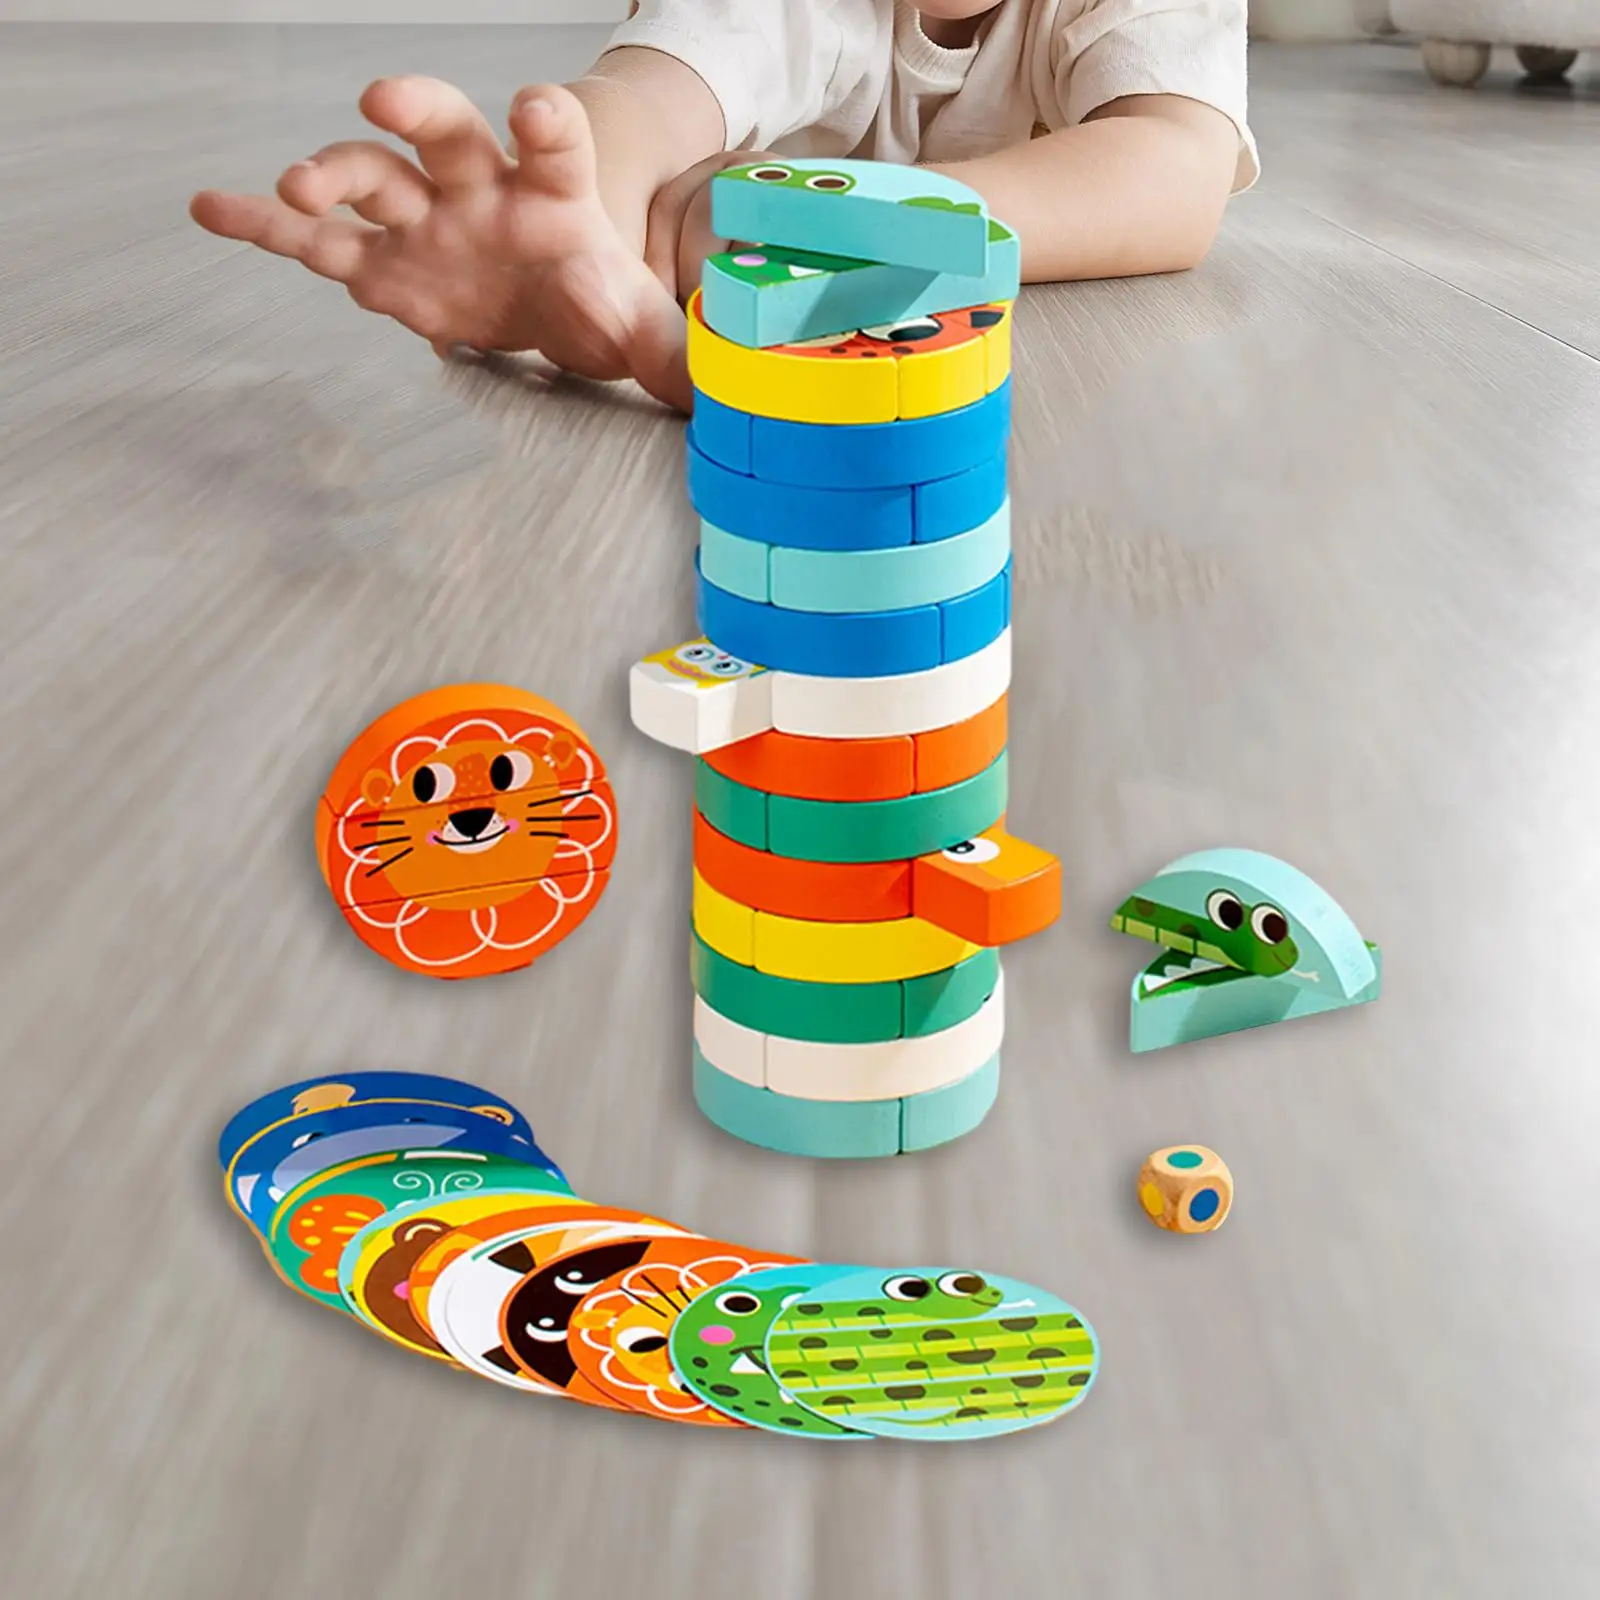 Wooden Blocks Stacking Game Tumble Towers Game for Festival Children